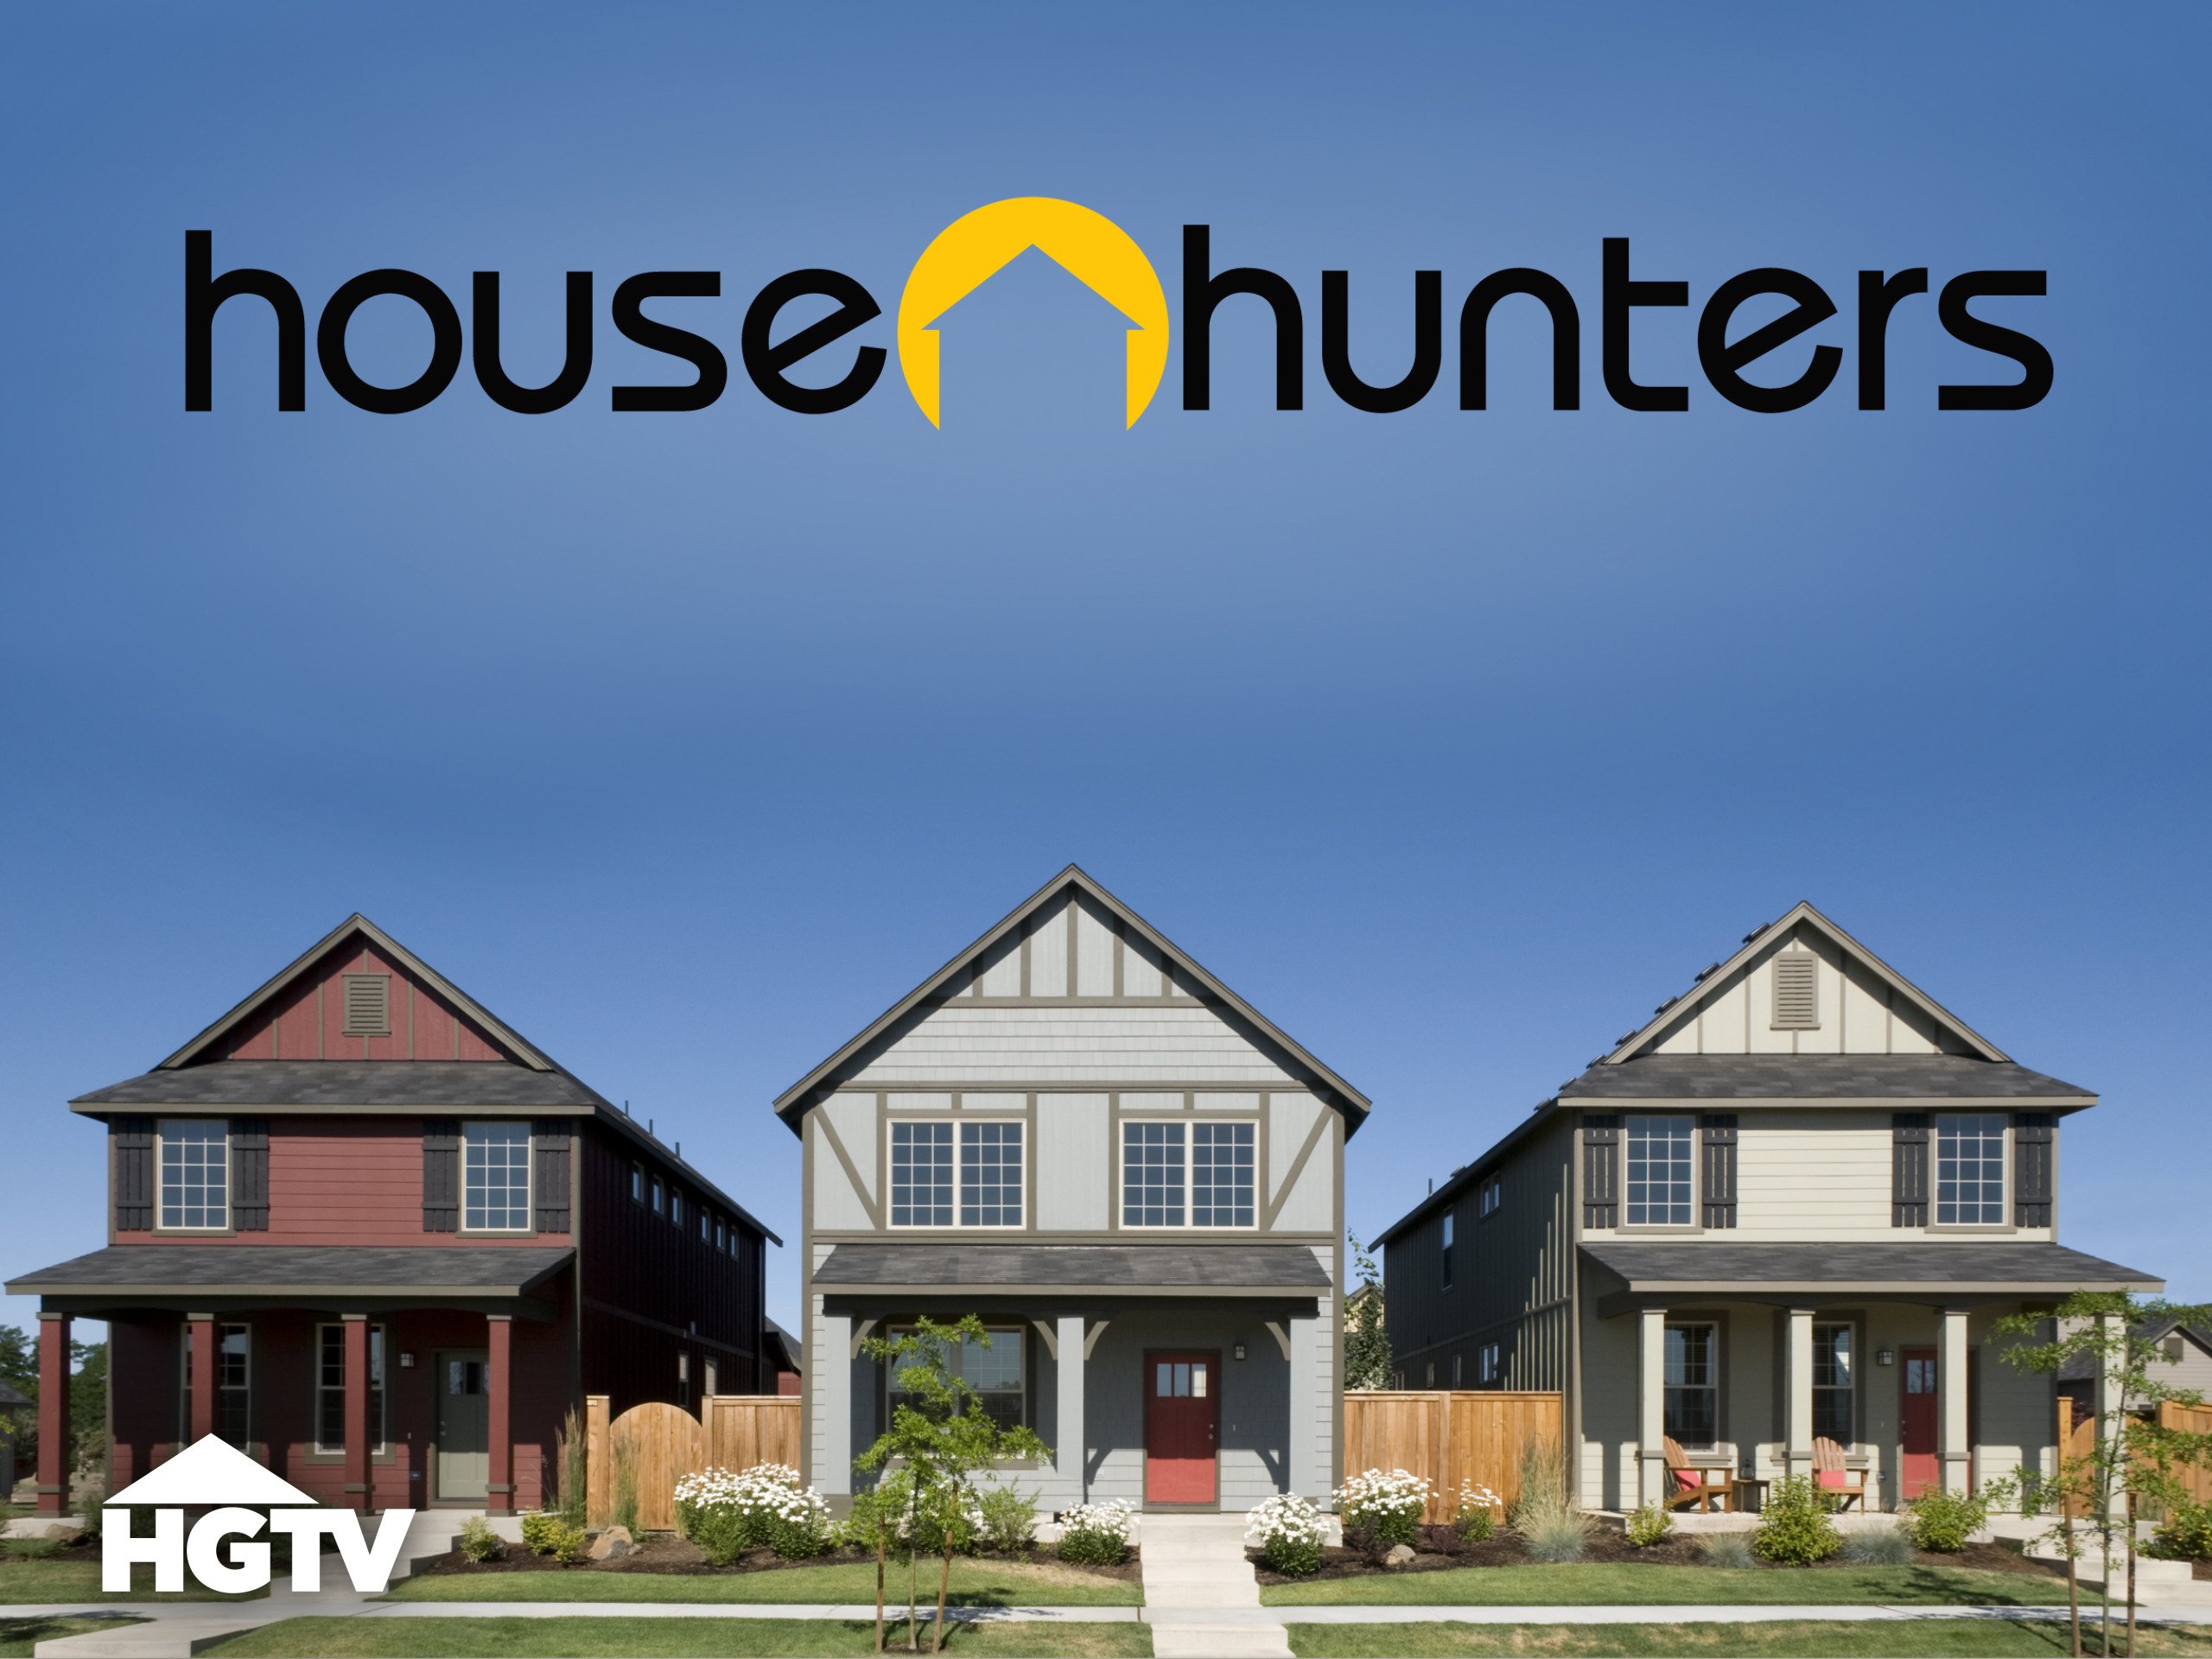 house hunters on hgtv is scripted